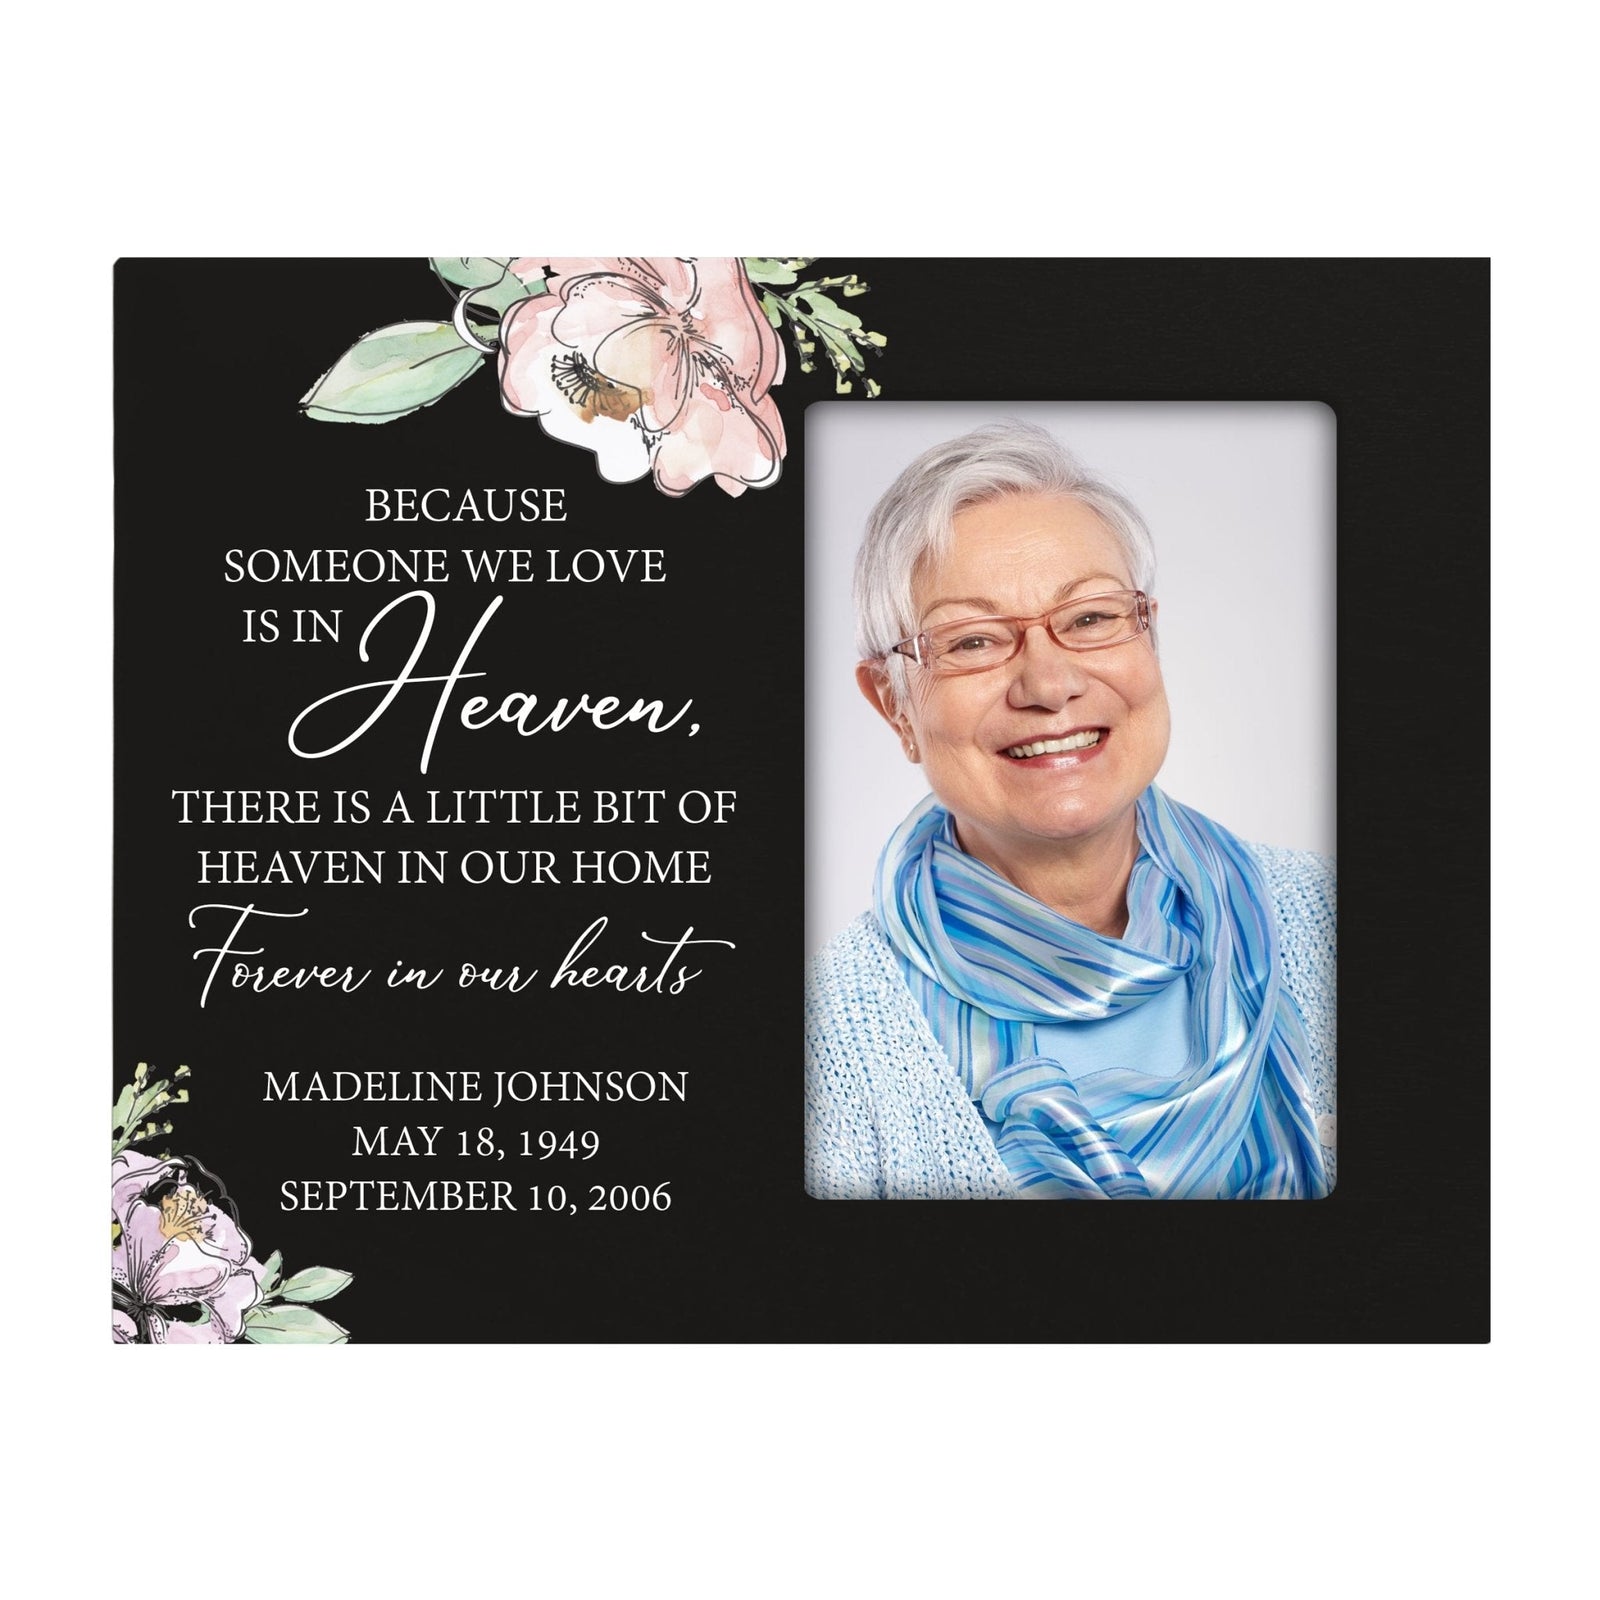 Personalized Horizontal 8x10 Wooden Memorial Picture Frame Holds 4x6 Photo - Because Someone We Love (Black) - LifeSong Milestones